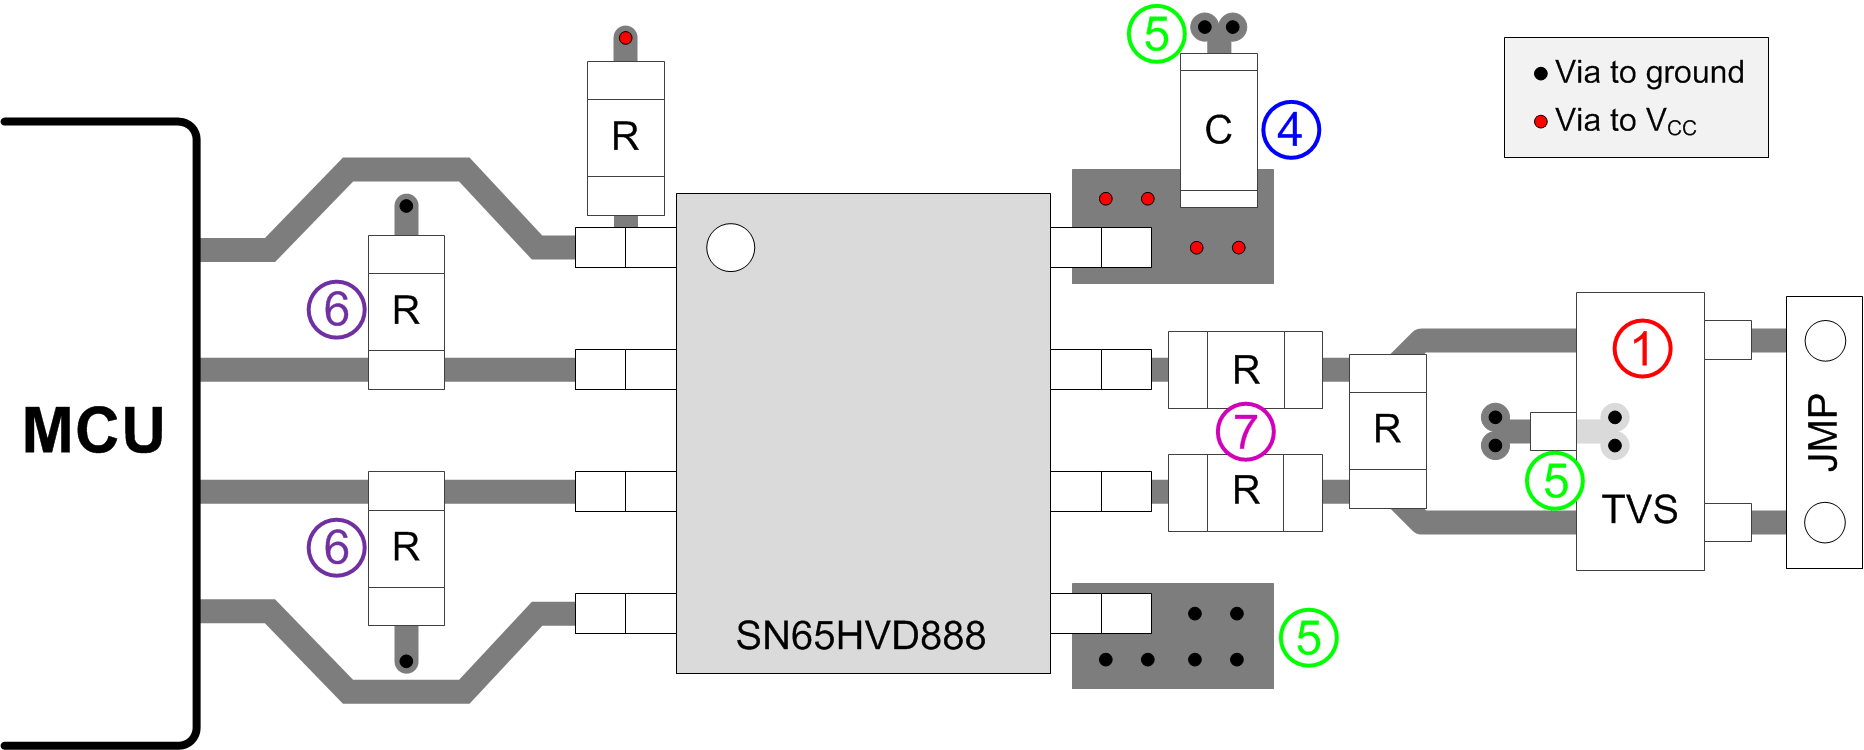 SN65HVD888 layout_example_1.gif